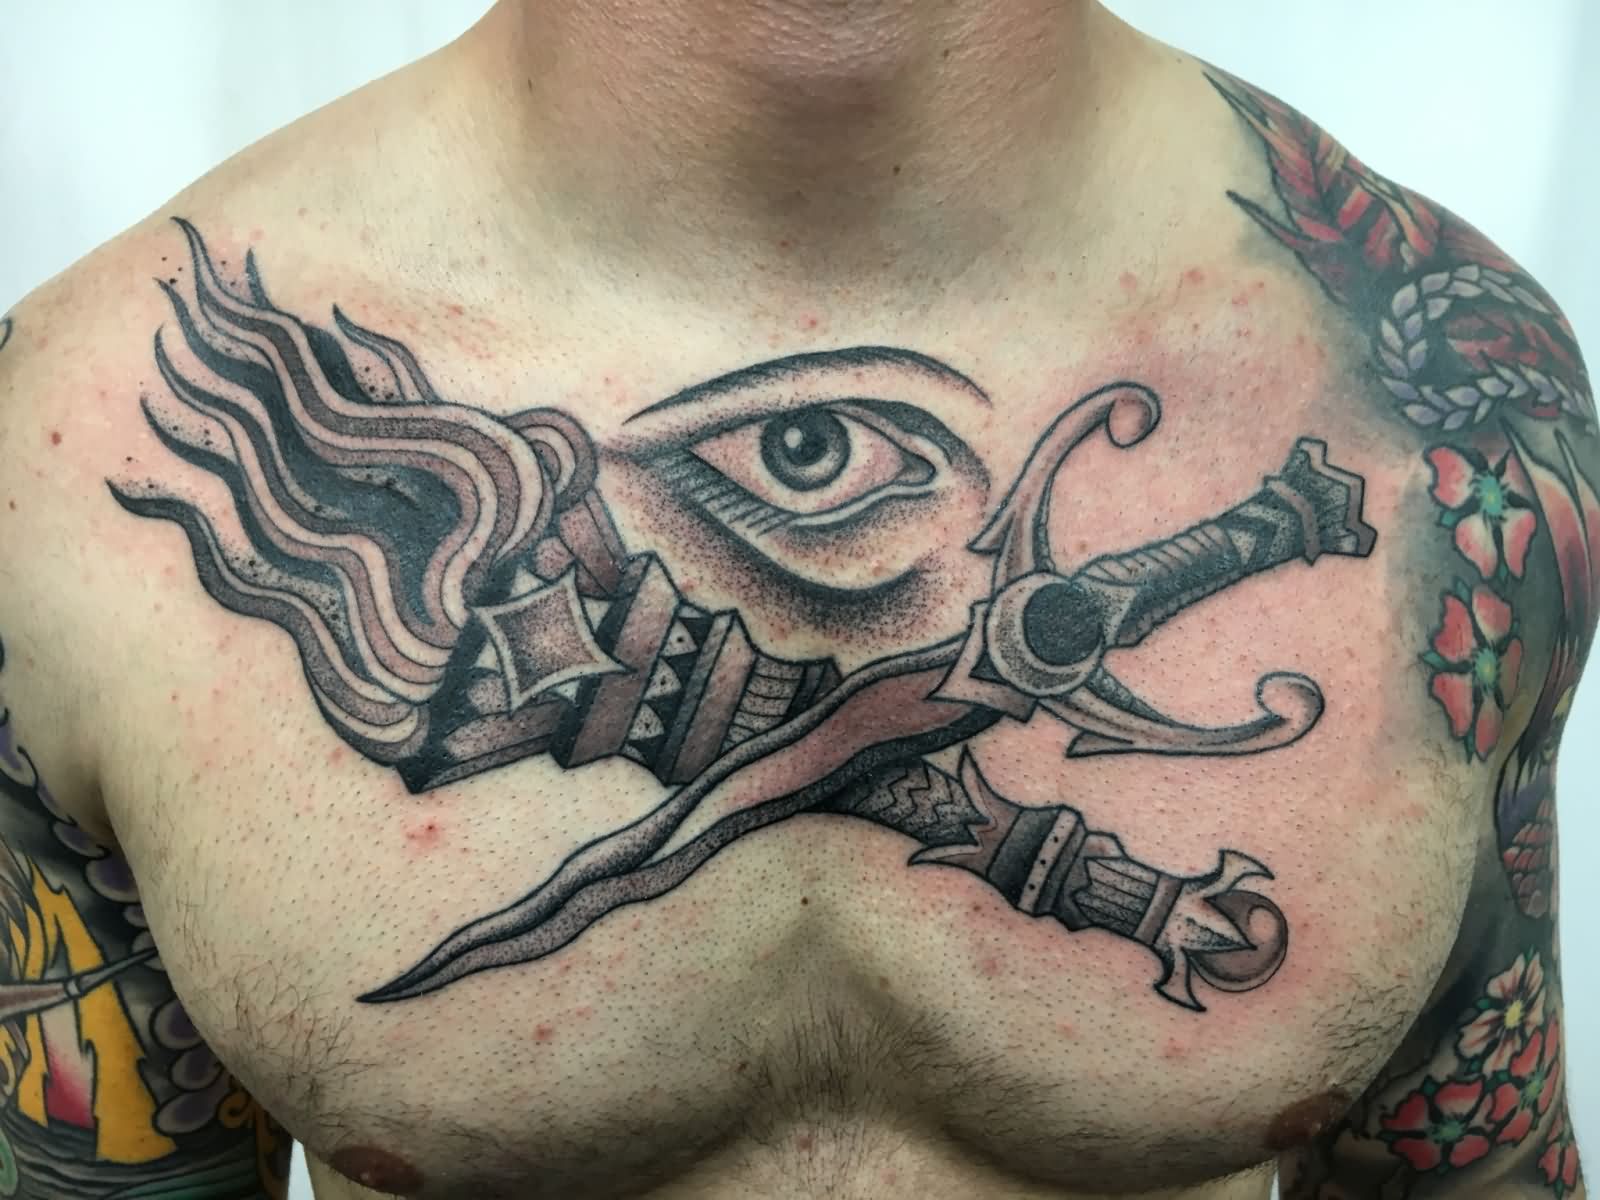 Black Ink Dotwork Flambeau With Sword And Eye Tattoo On Man Chest By Kohen Meyers